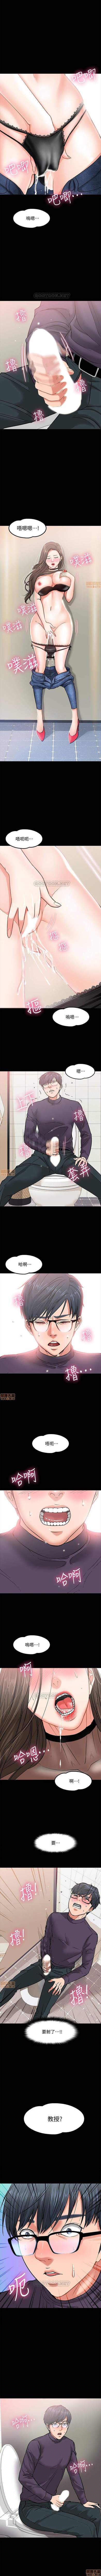 Rabo PROFESSOR, ARE YOU JUST GOING TO LOOK AT ME? | DESIRE SWAMP | 教授，你還等什麼? Ch. 3 [Chinese] Manhwa Outside - Page 7